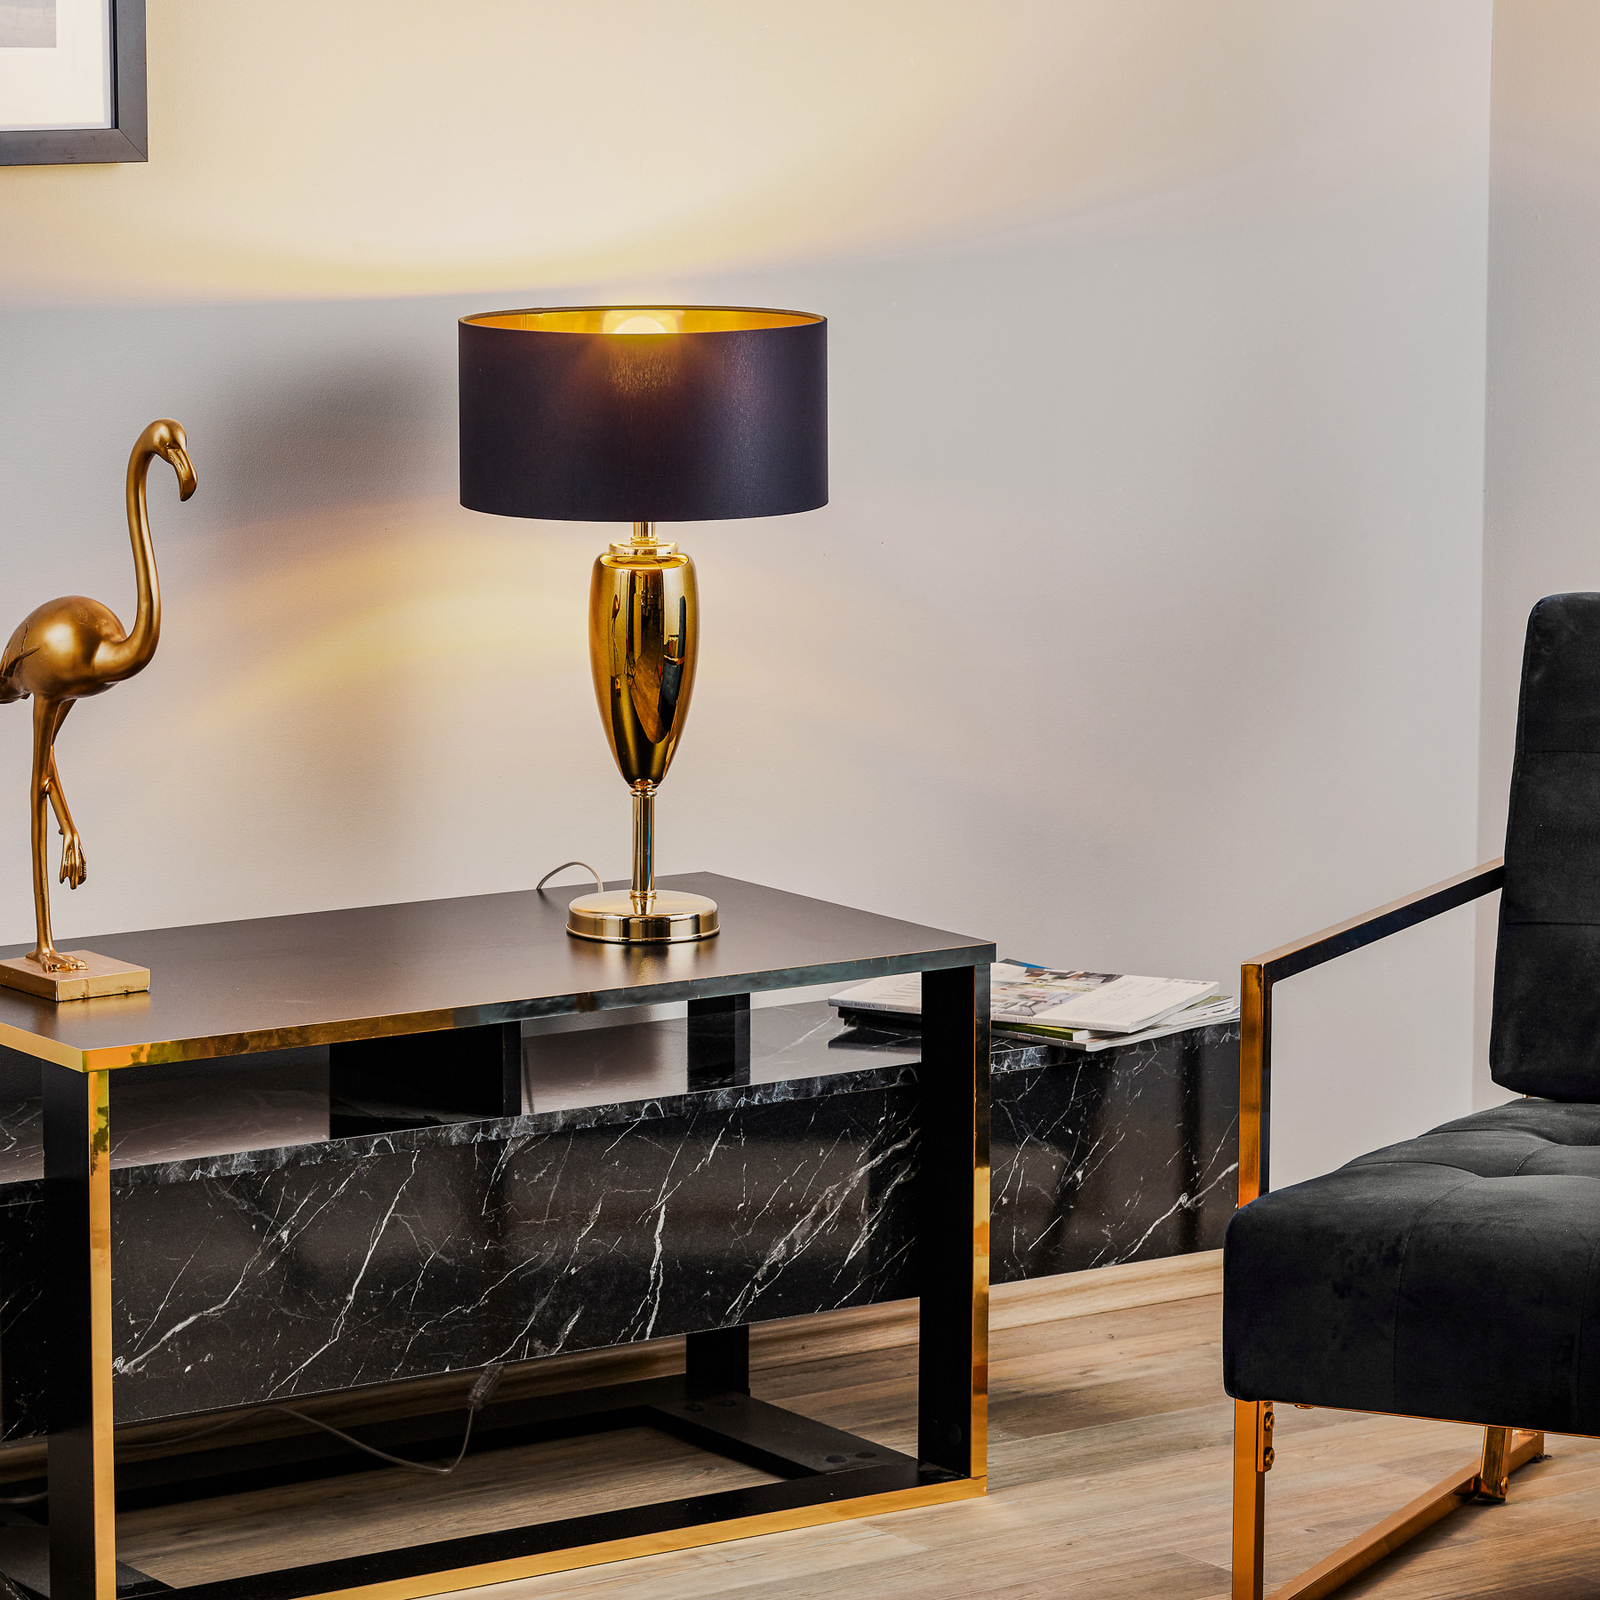 Show Ogiva - black and gold textile table lamp